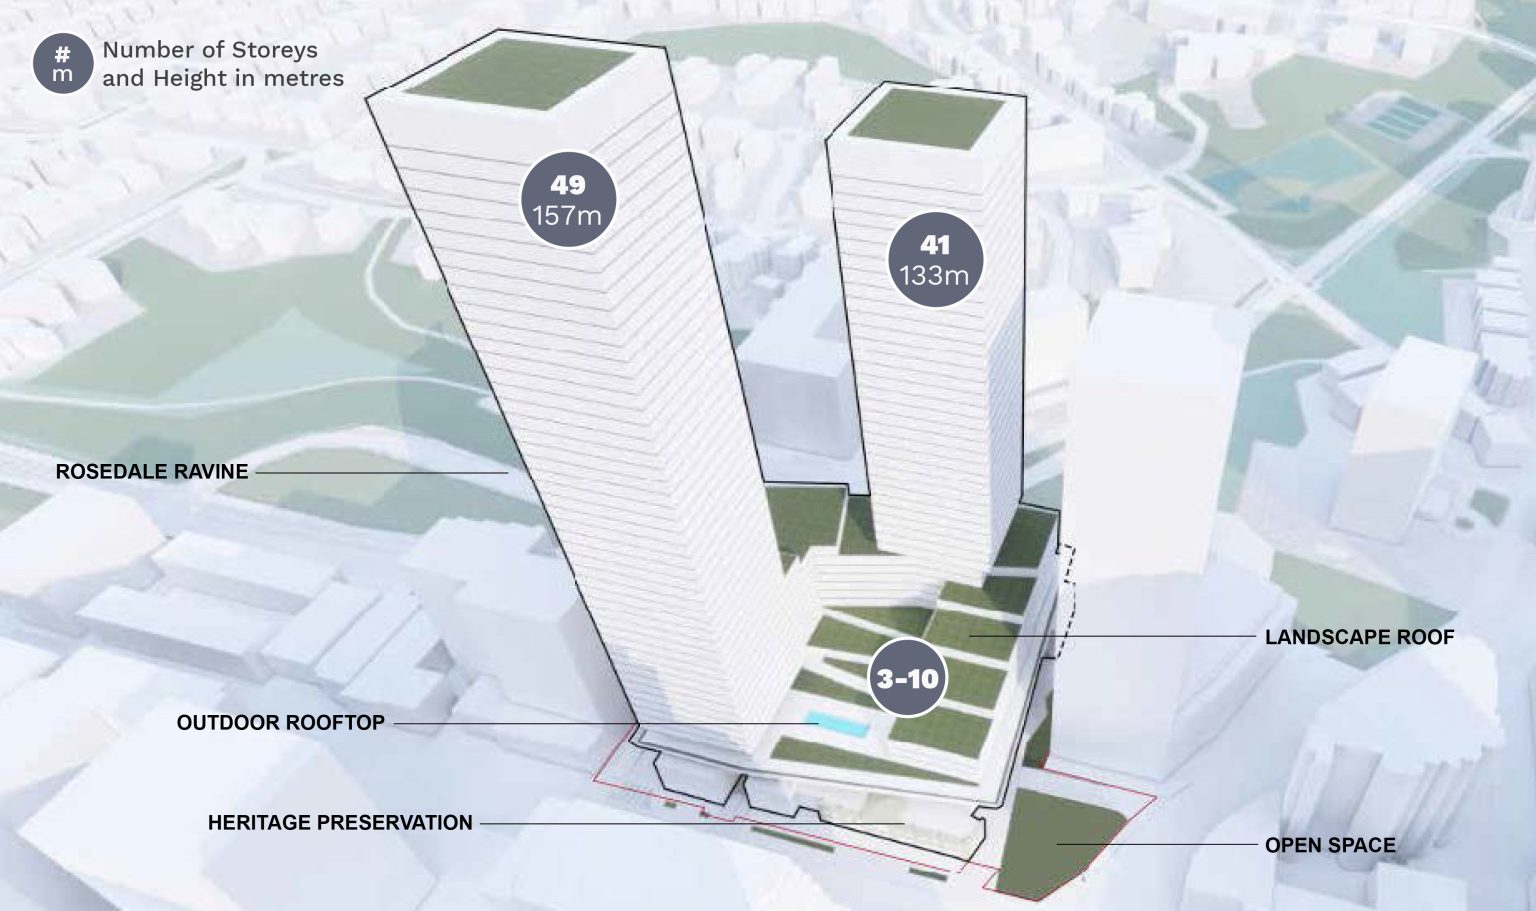 3D rendering: North tower is 49 storeys and 157 metres. South tower is 41 storeys and 133 metres. Ground level building is 3 to 10 storeys. Highlighted are Rosedale Ravine behind, outdoor rooftop and landscape roof atop ground floor building, and heritage preservation and open space in front.